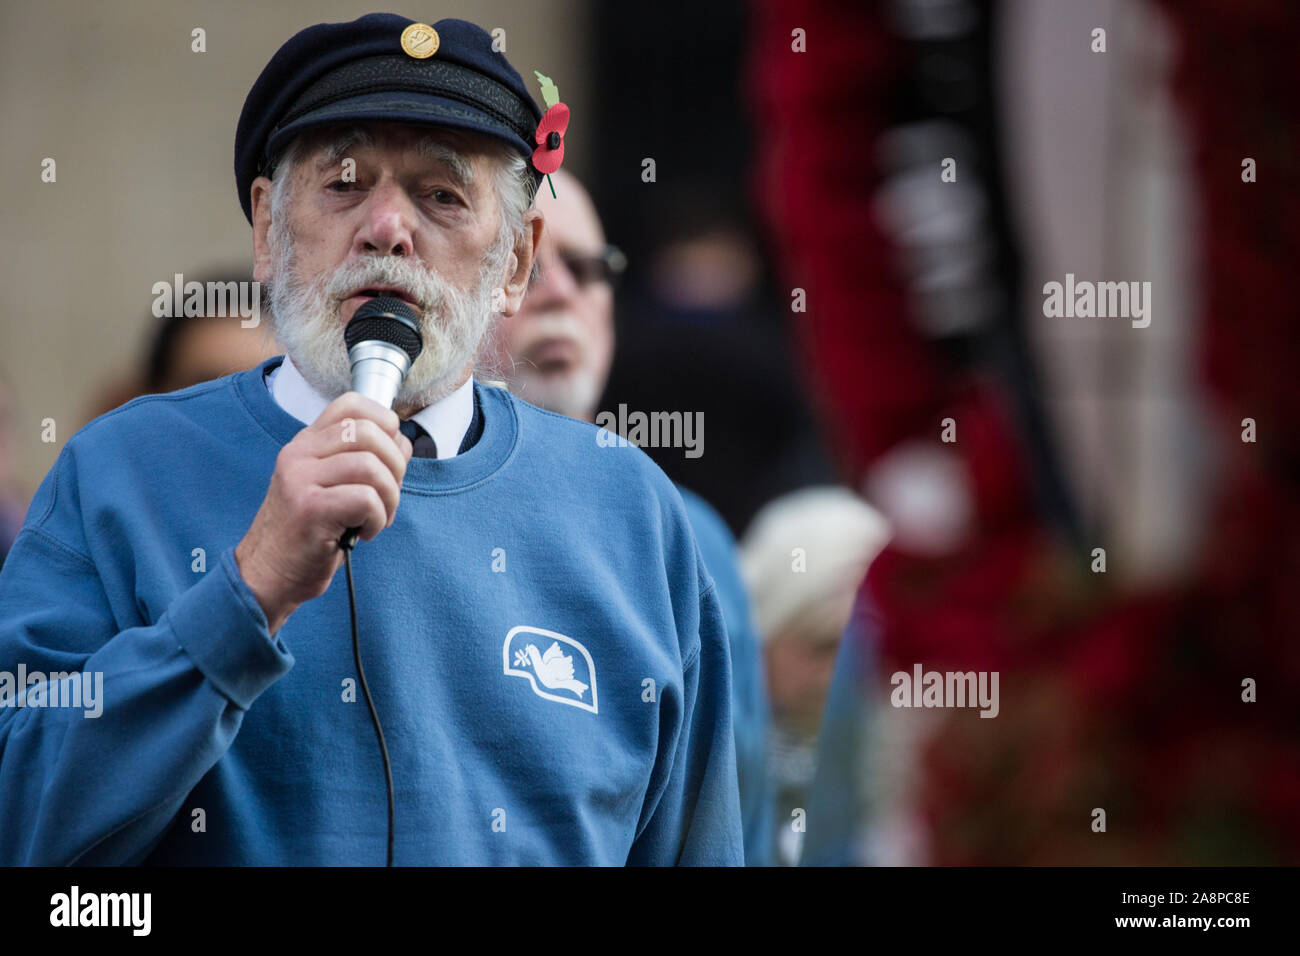 London, UK. 10 November, 2019. Jim Radford (c), D-Day veteran and folk singer, sings ‘1916’ in front of ex-services personnel from Veterans For Peace UK (VFP UK) taking part in the Remembrance Sunday ceremony at the Cenotaph. VFP UK was founded in 2011 and works to influence the foreign and defence policy of the UK for the larger purpose of world peace. Credit: Mark Kerrison/Alamy Live News Stock Photo